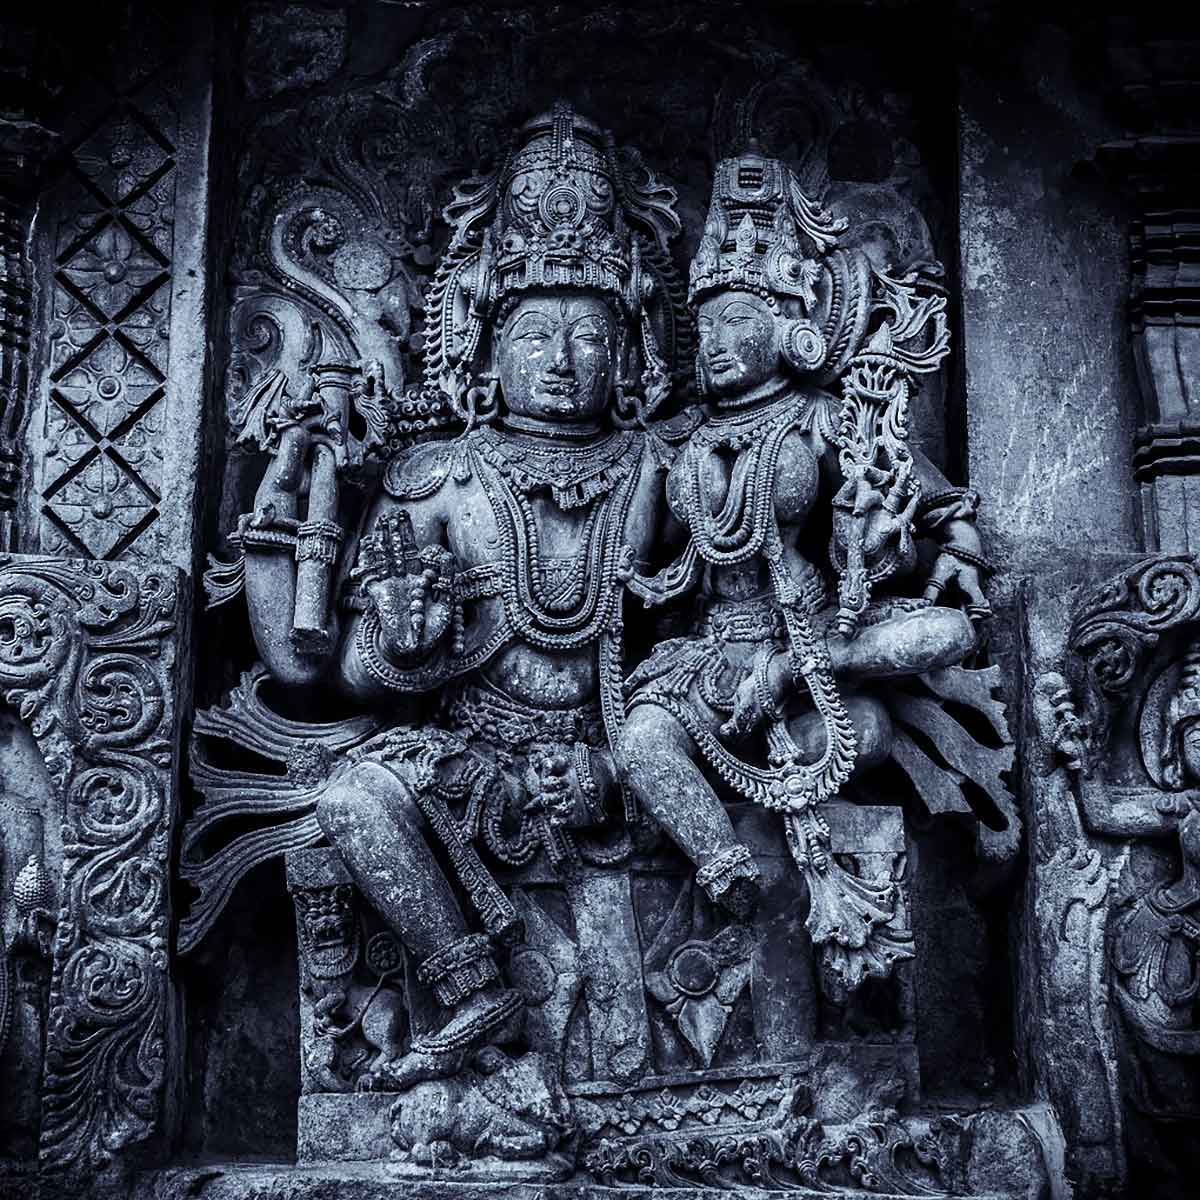 Hindu gods provide a link with all Ancient gods